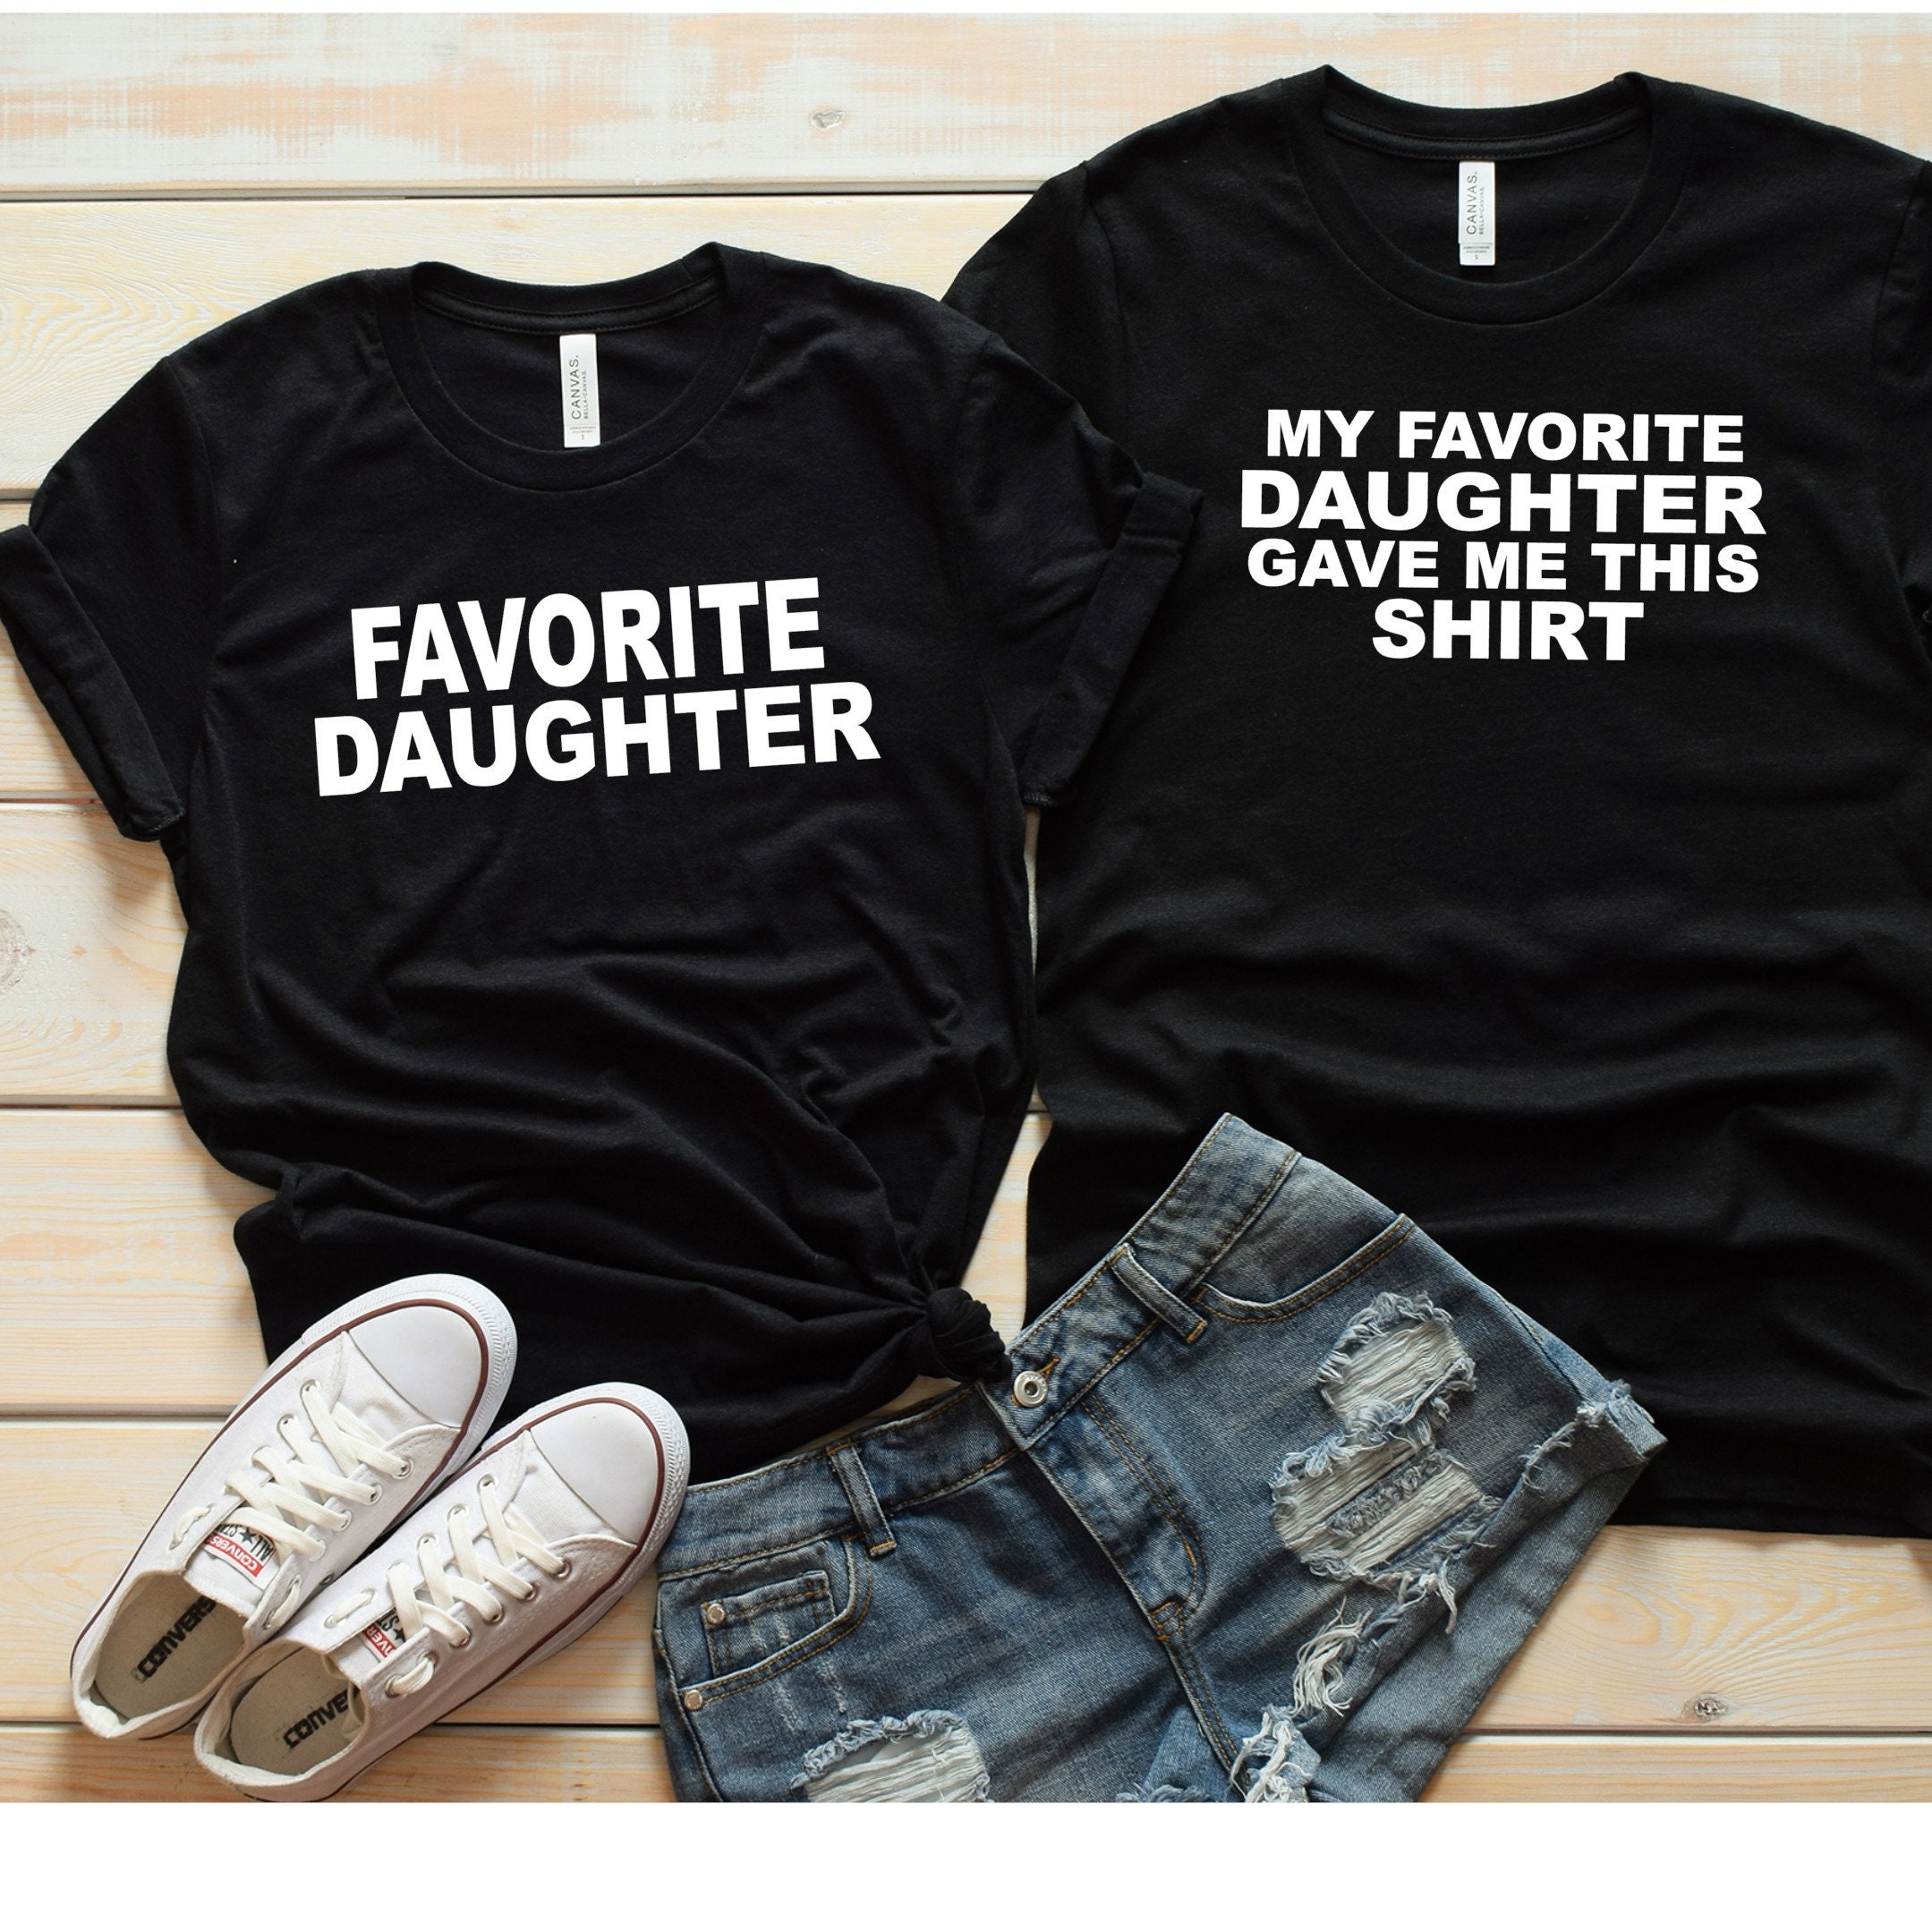 Funny Father Daughter Shirts - Gift for Dad- My favorite Daughter gave me this shirt - Favorite Daughter - Cute Matching Shirts - Mother tee